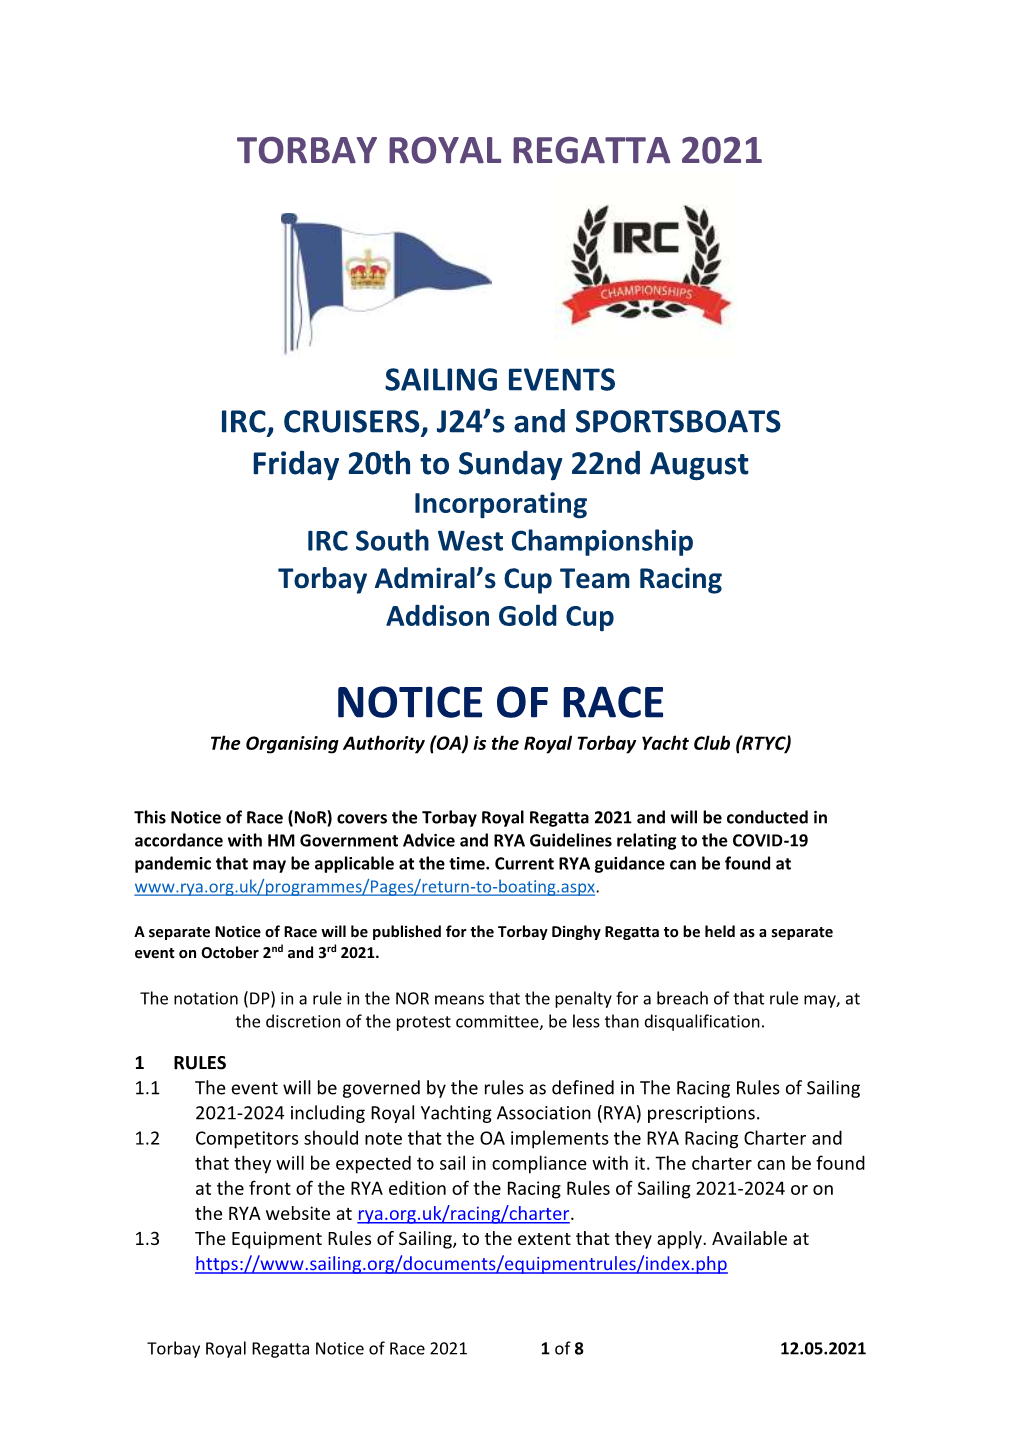 NOTICE of RACE the Organising Authority (OA) Is the Royal Torbay Yacht Club (RTYC)